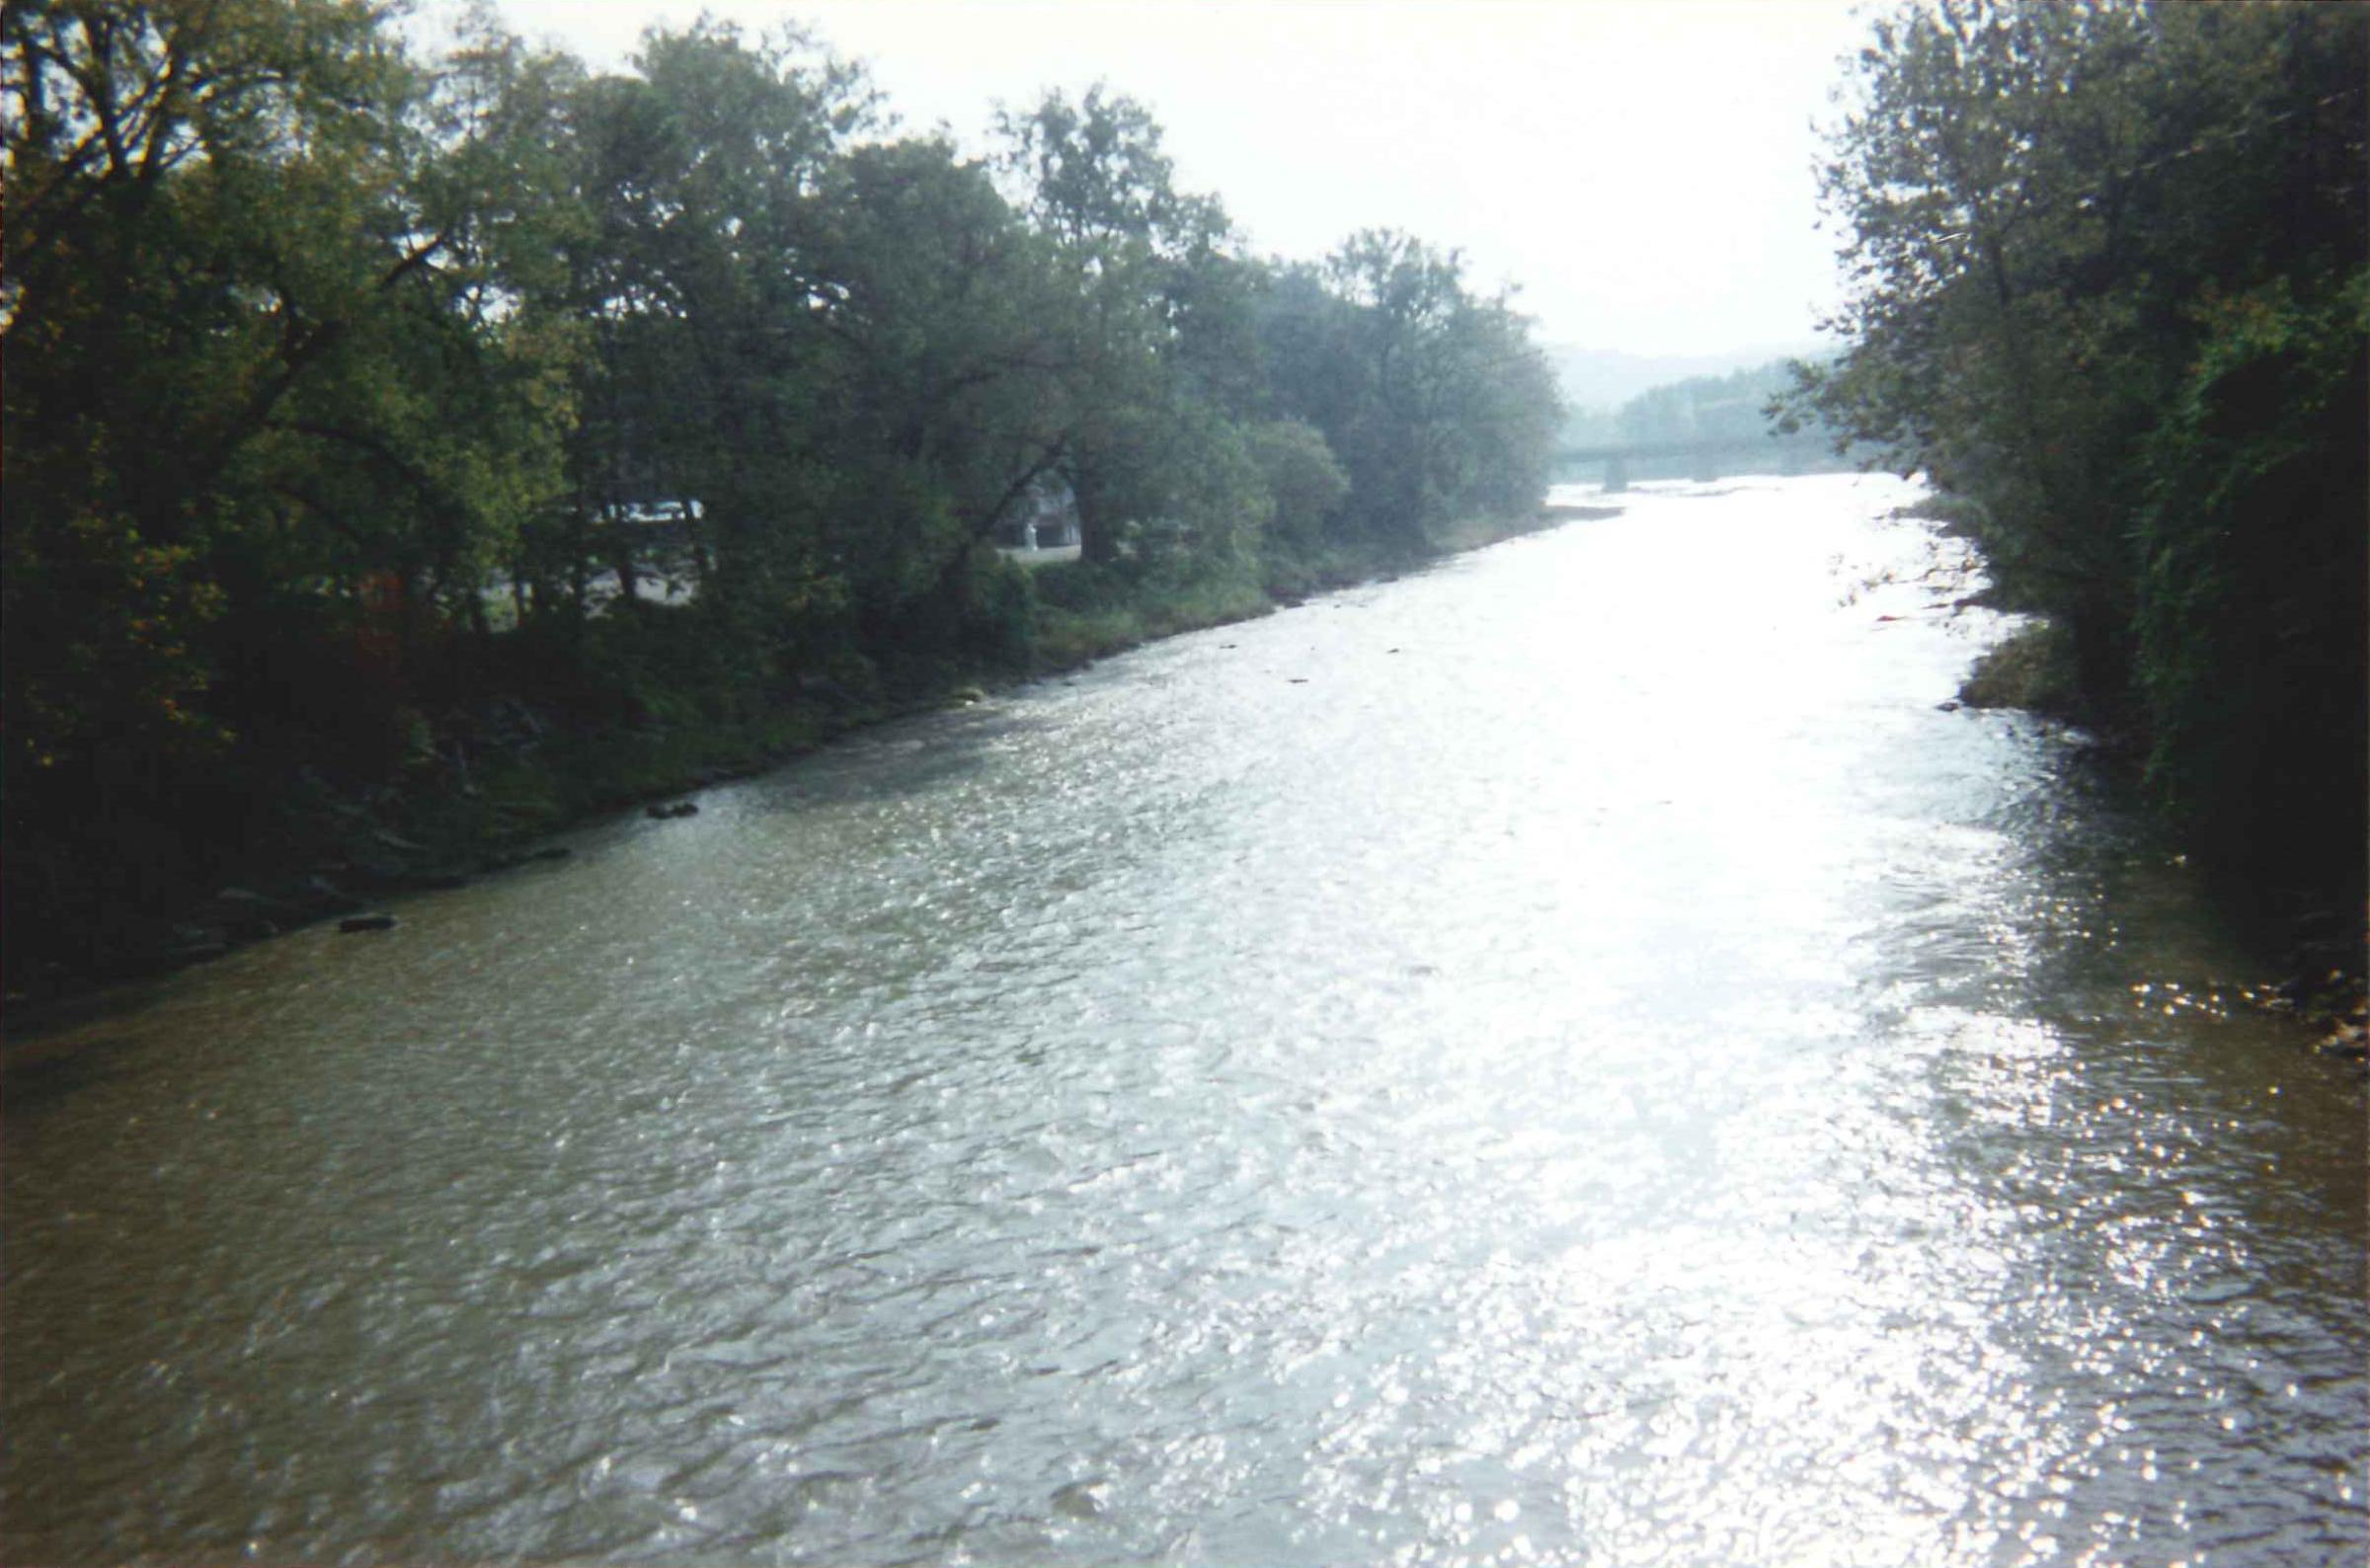 Photograph of the Cattaraugus Creek at Gowanda, NY (GOWN6) looking upstream